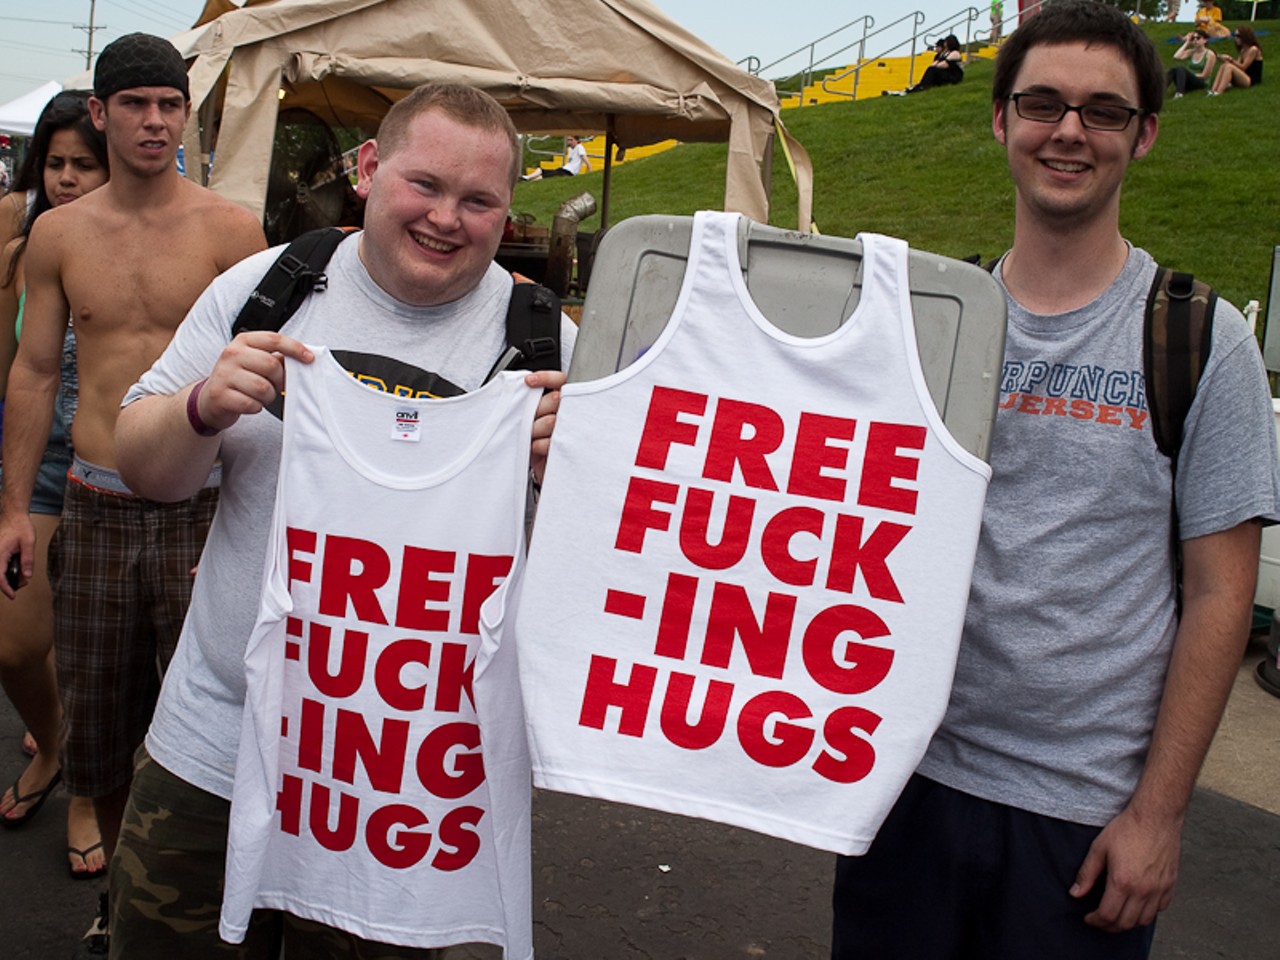 Kevin Vaughn (left) and James Carroll (right) with shirts advertising free hugs, ironically the shirts were $20 each.